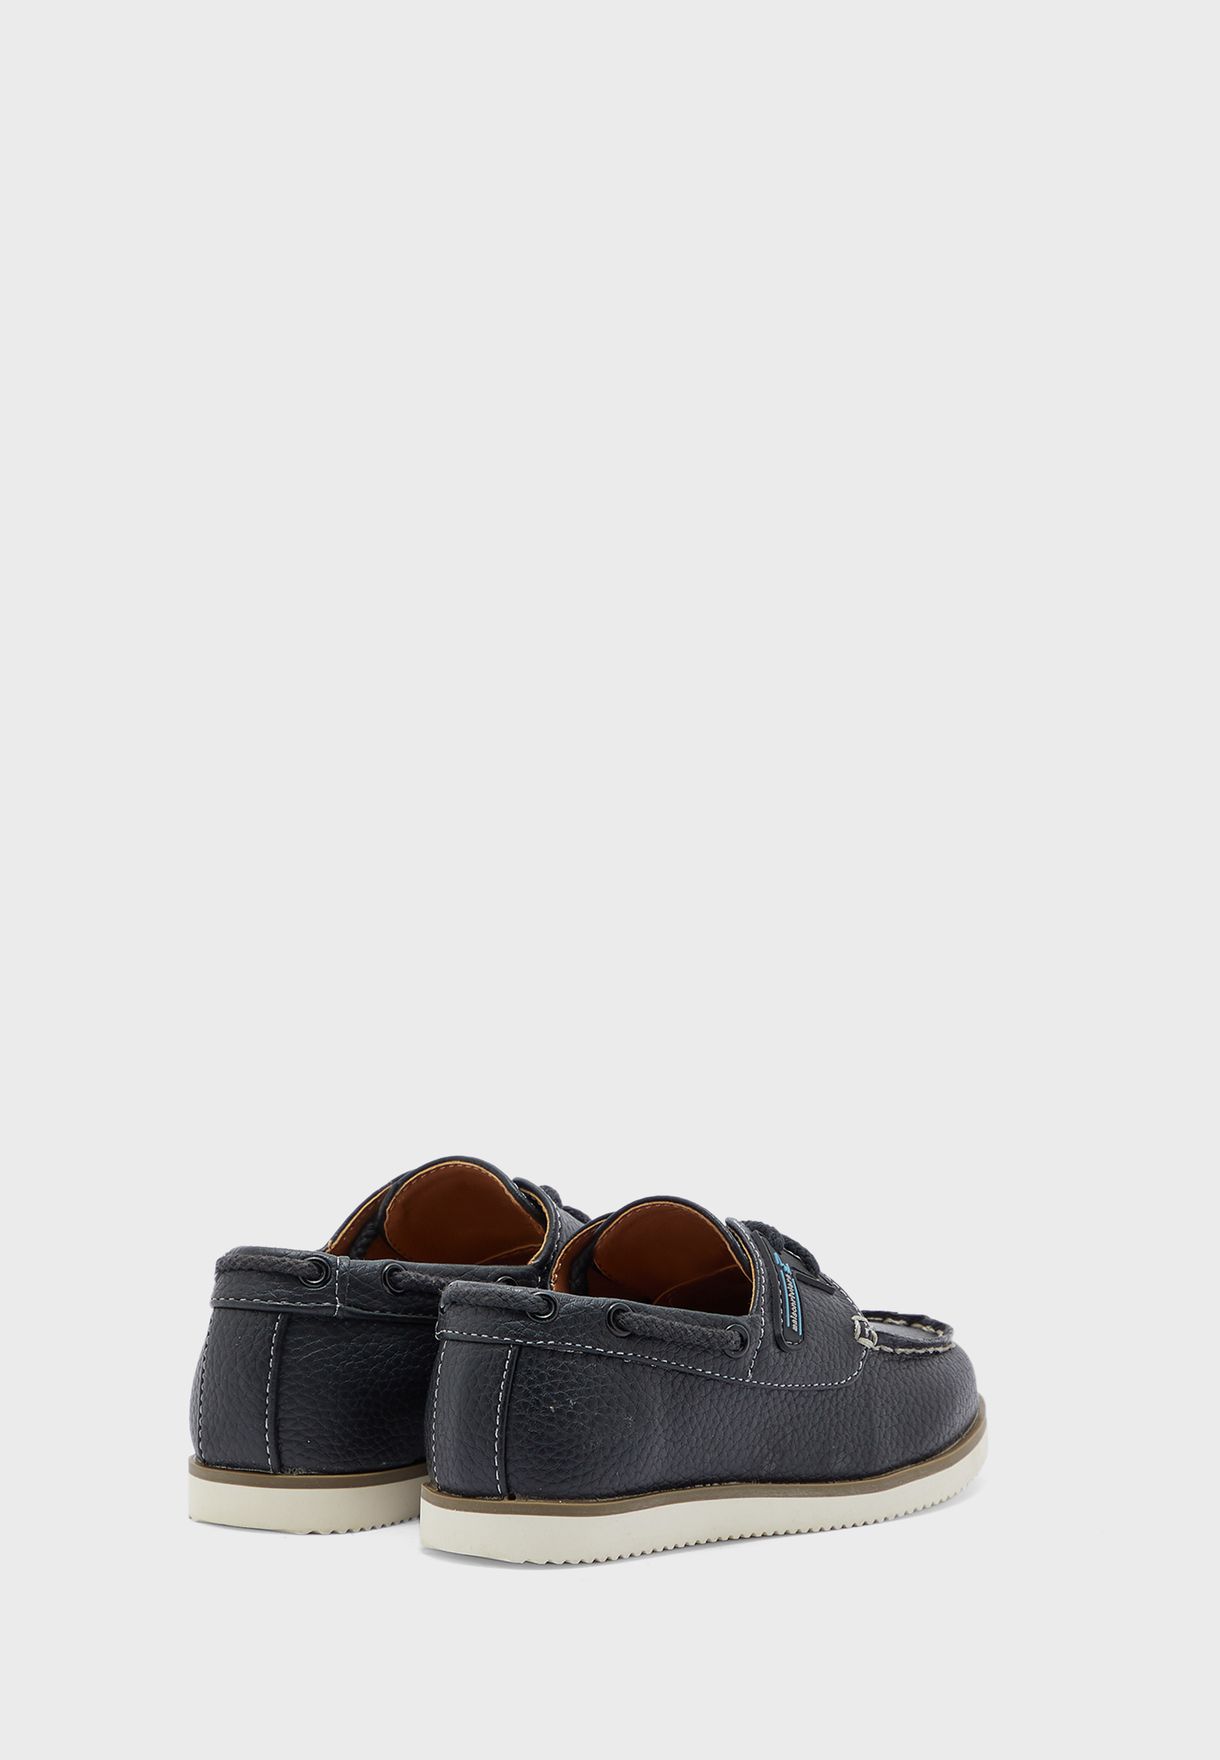 Kids Patched Boat Shoe